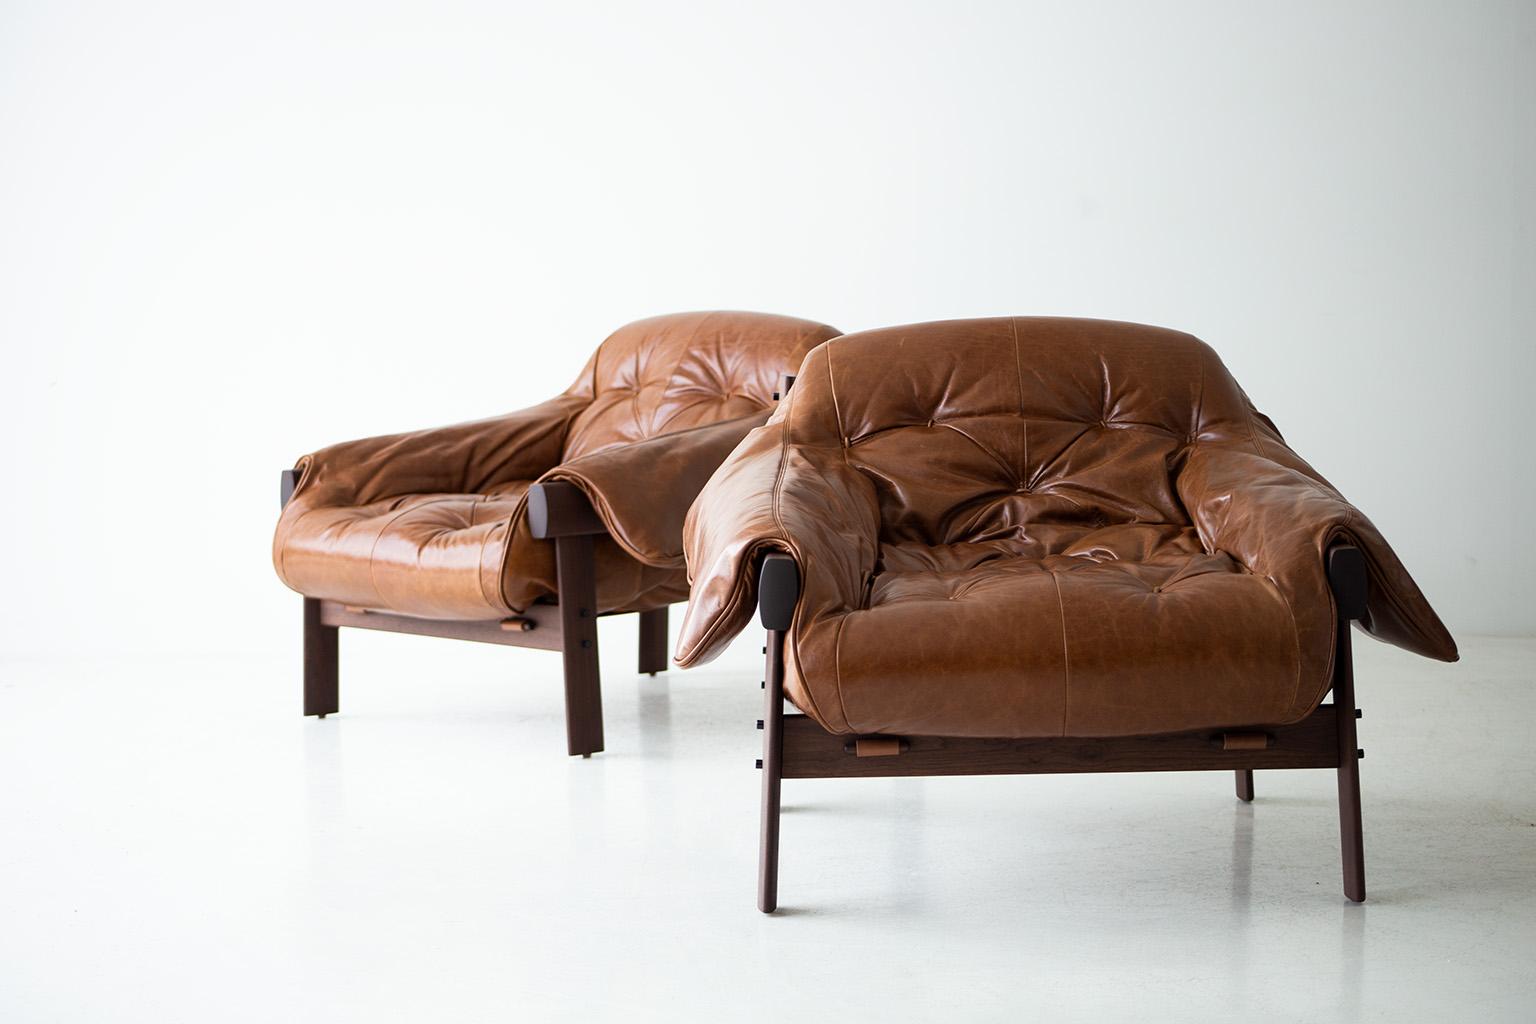 Craft lounge chairs, lafer lounge chairs, brown leather and walnut, Modern

Designer: Percival Lafer
Manufacturer: Craft Associates® Furniture
Period/Model: Mid-Century Modern
Specs: Walnut, leather

These Percival Lafer MP-41 lounge chairs